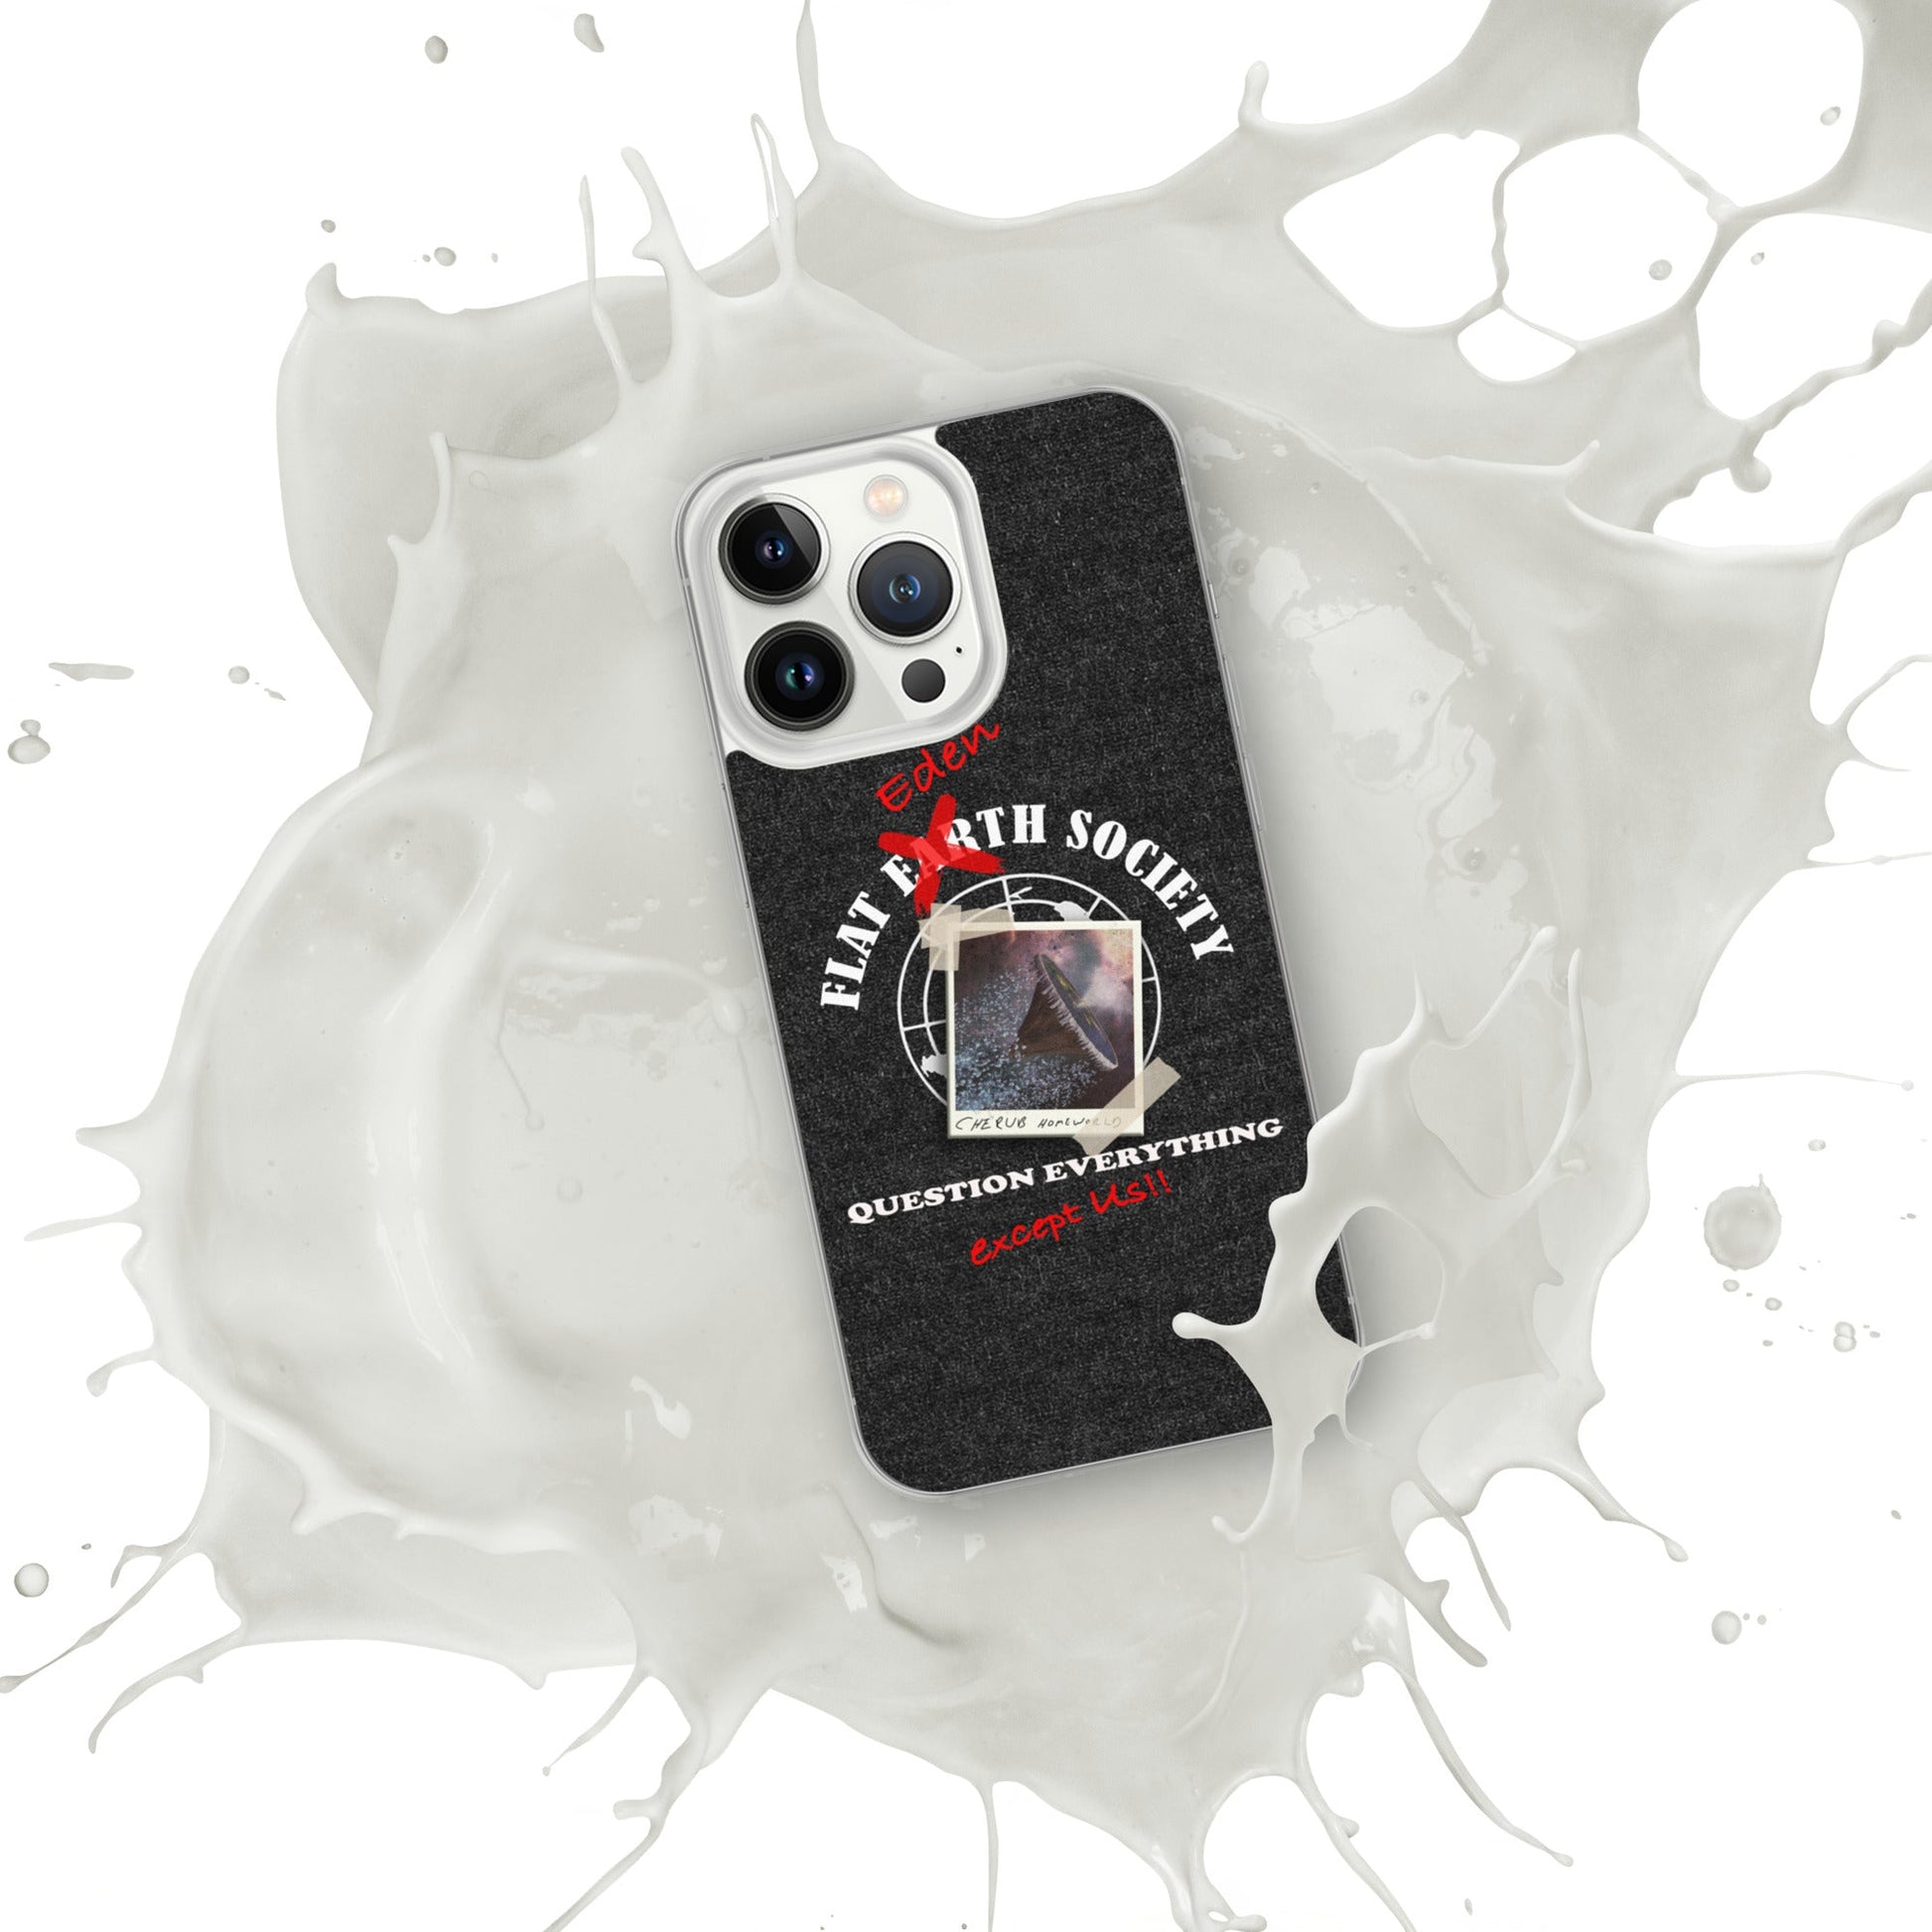 iPhone Case | Intergalactic Space Force 2 | Flat Eden Society - Spectral Ink Shop - Mobile Phone Cases -9780728_13800